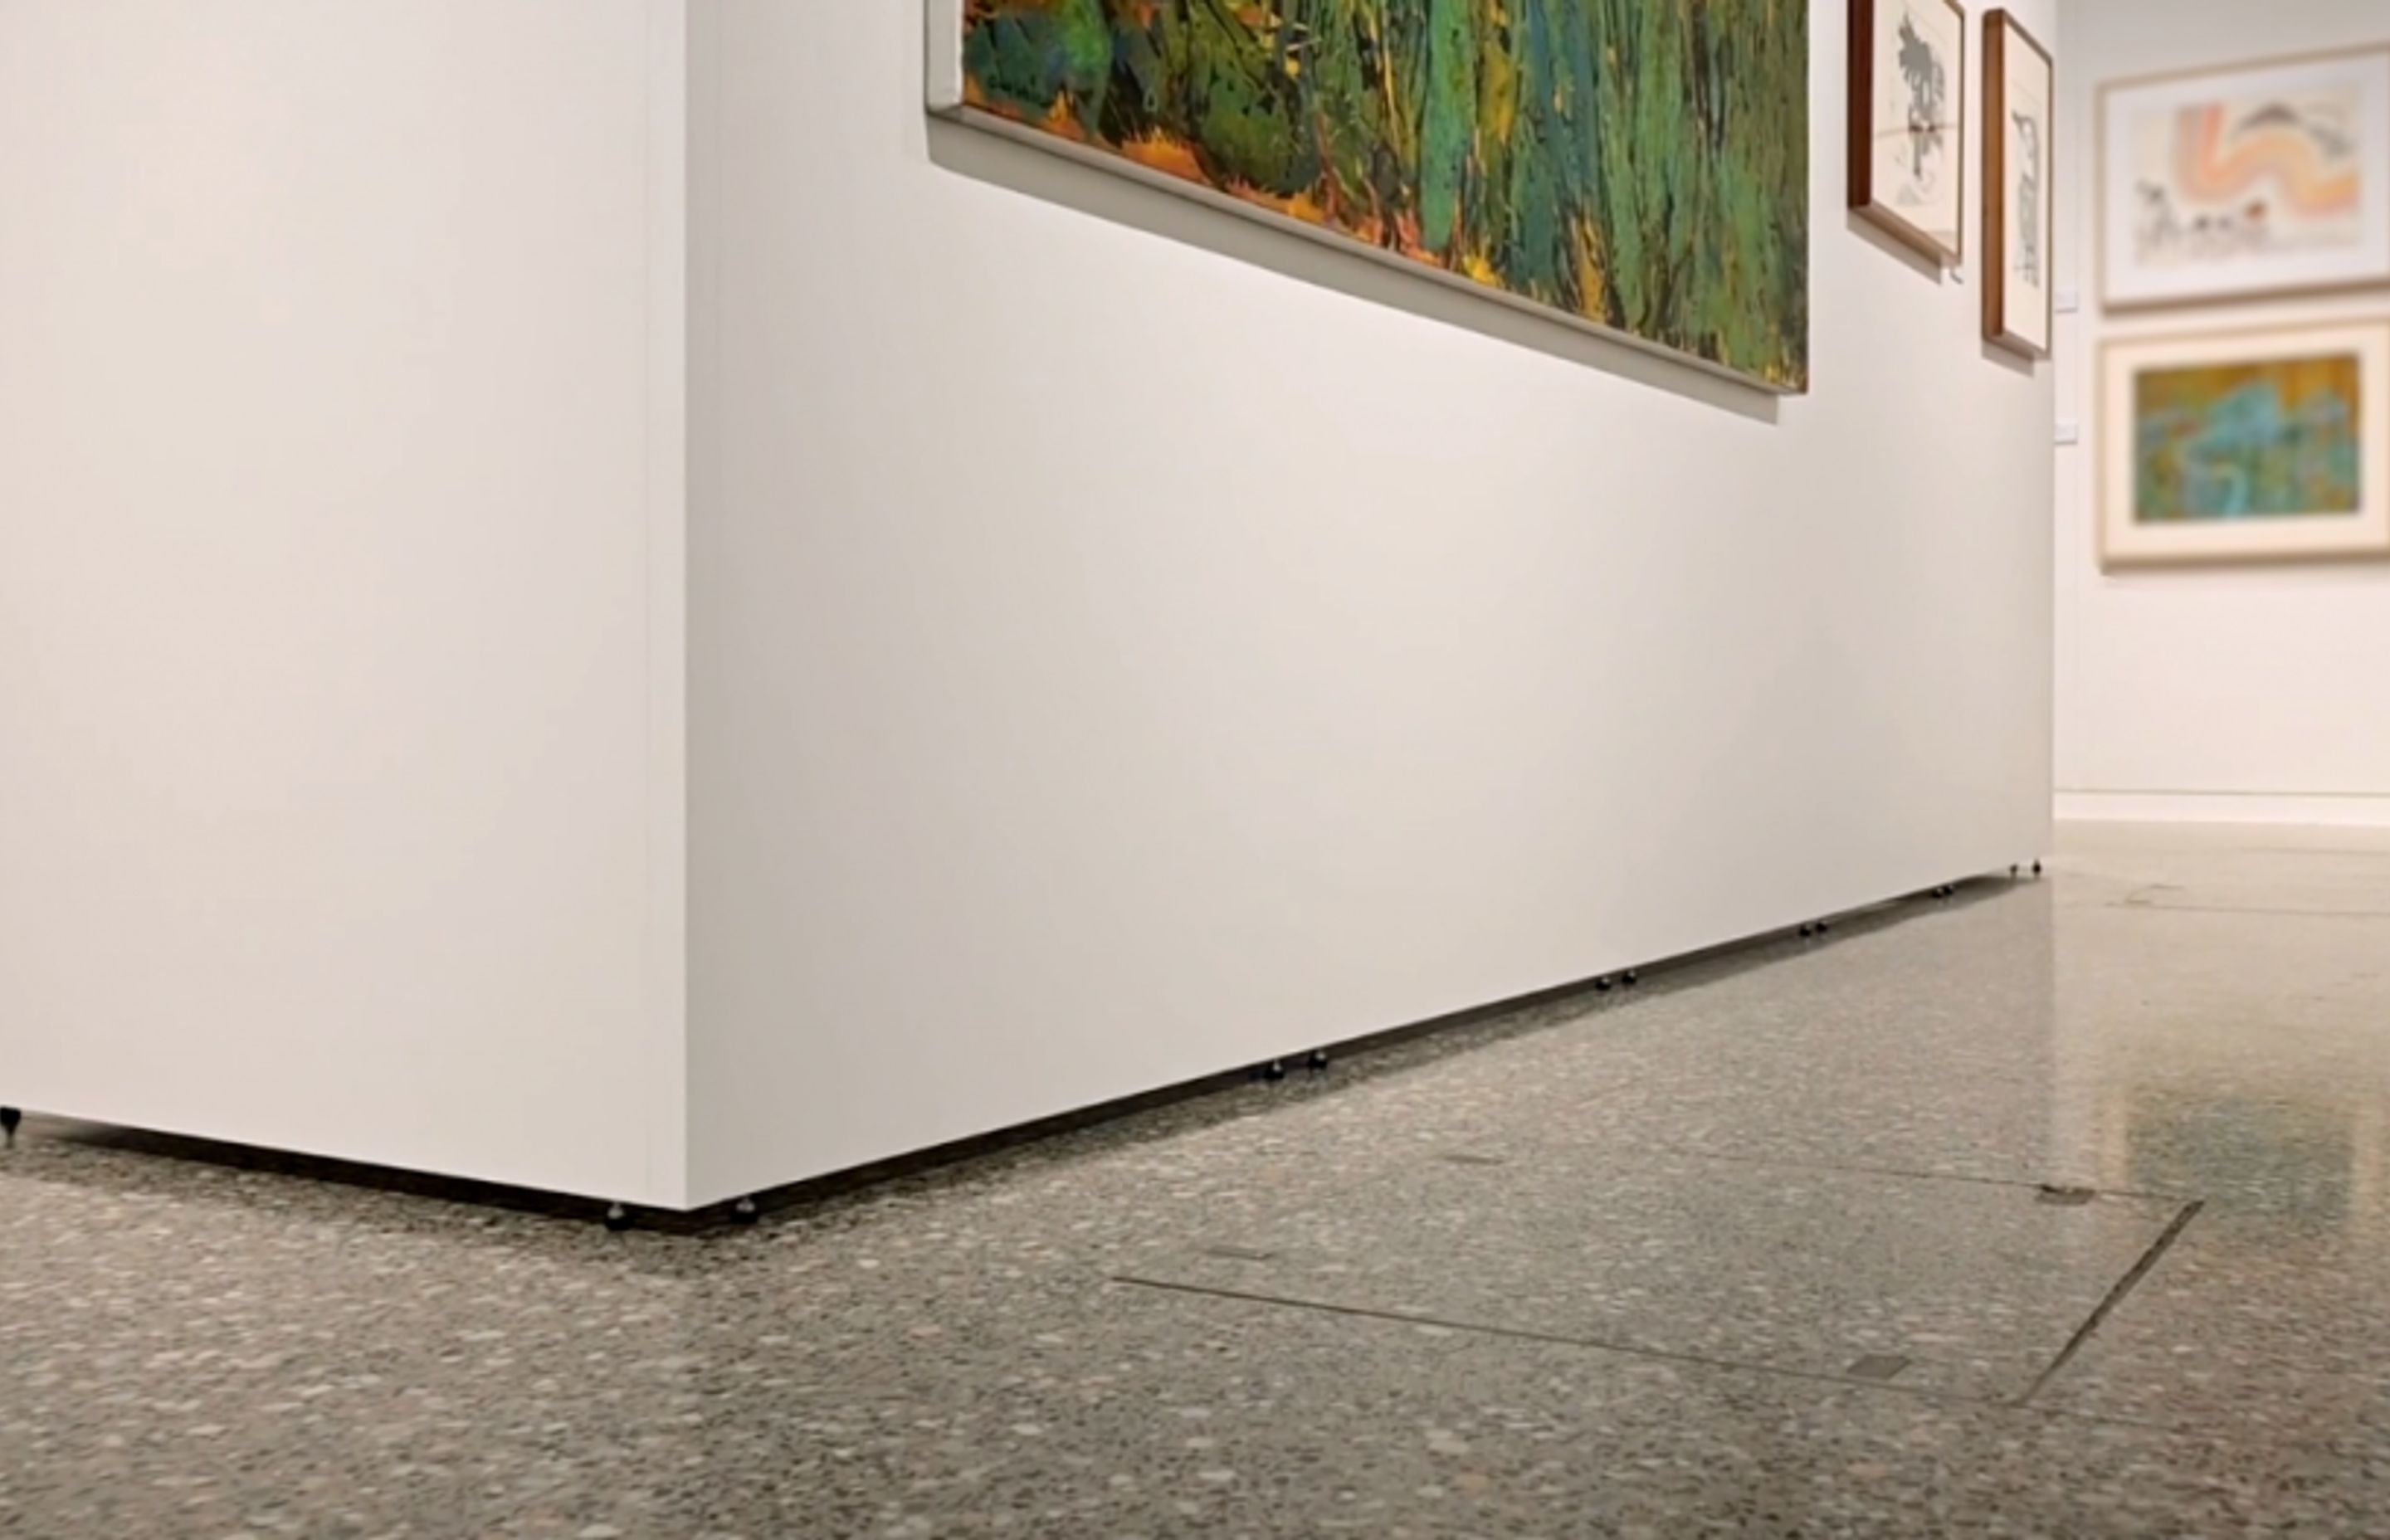 How UOW Art Gallery is using Mila-Wall® for their exhibition space